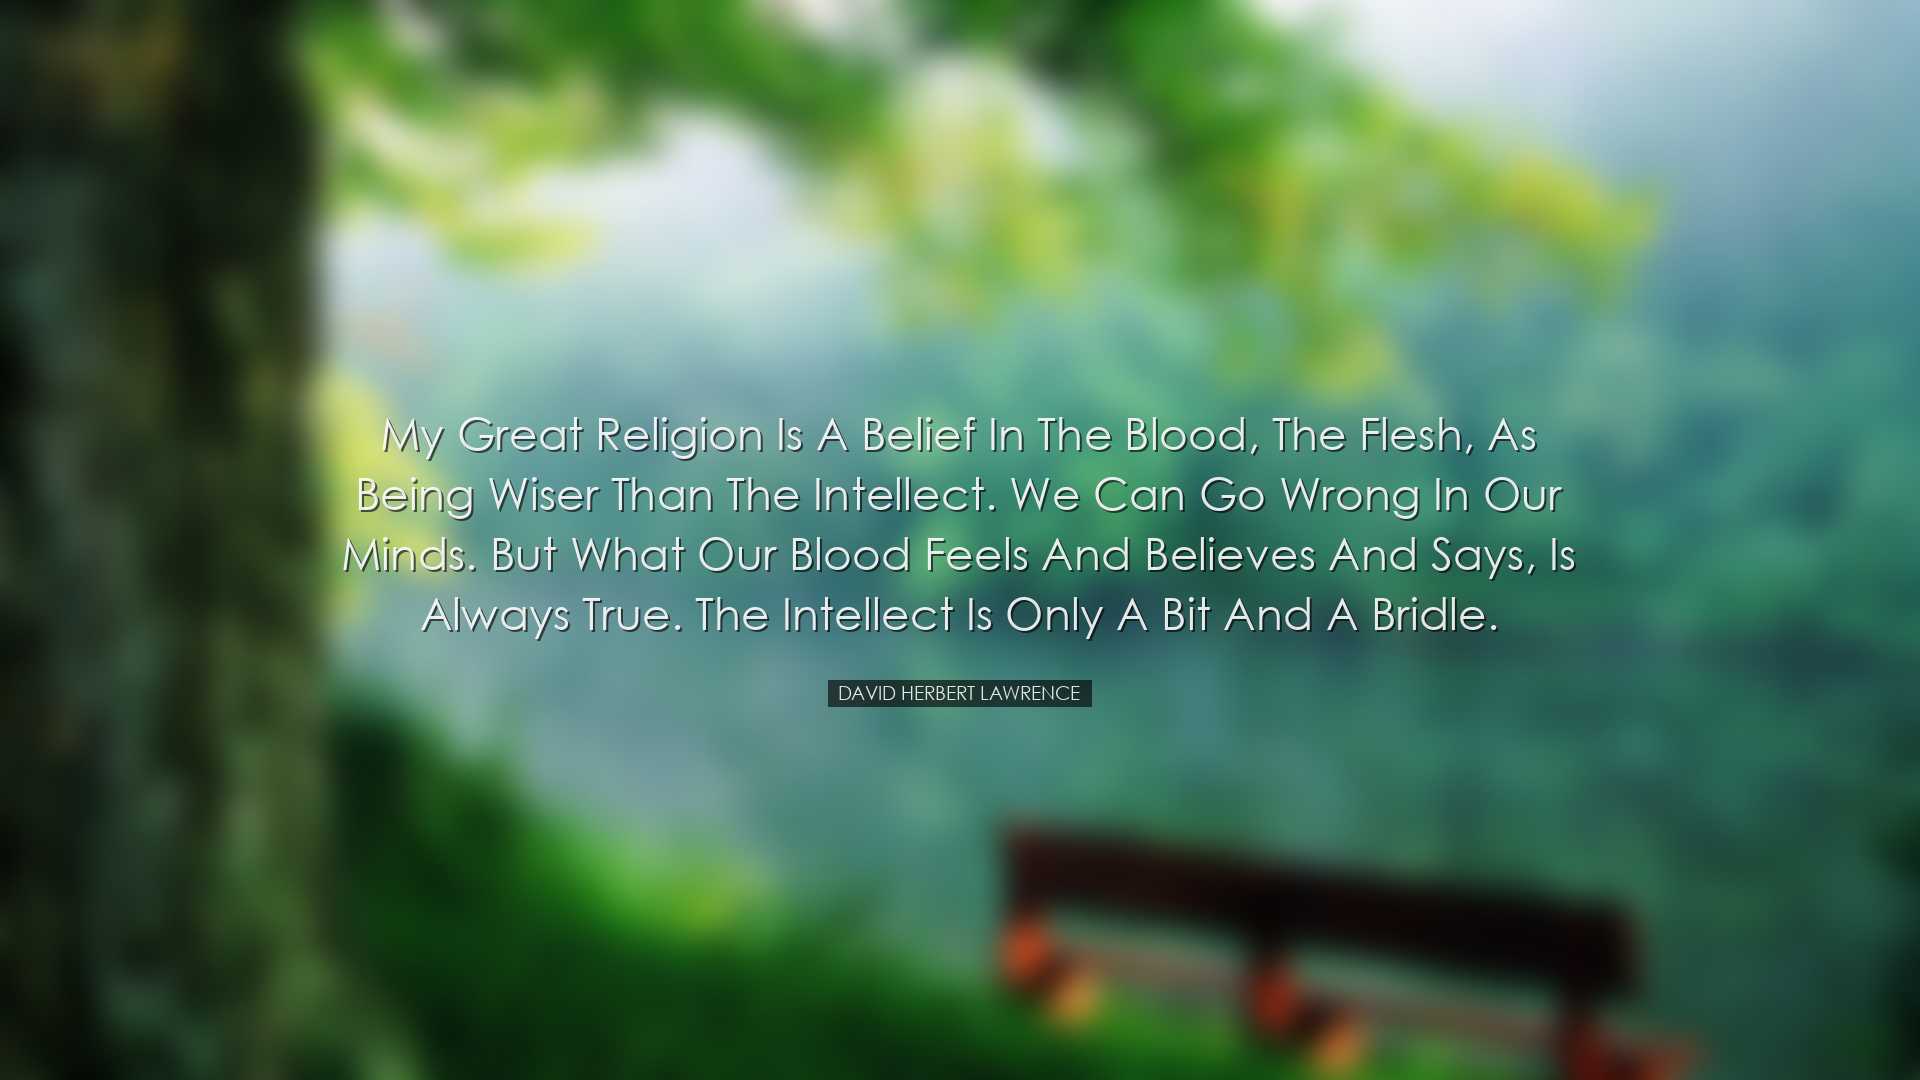 My great religion is a belief in the blood, the flesh, as being wi